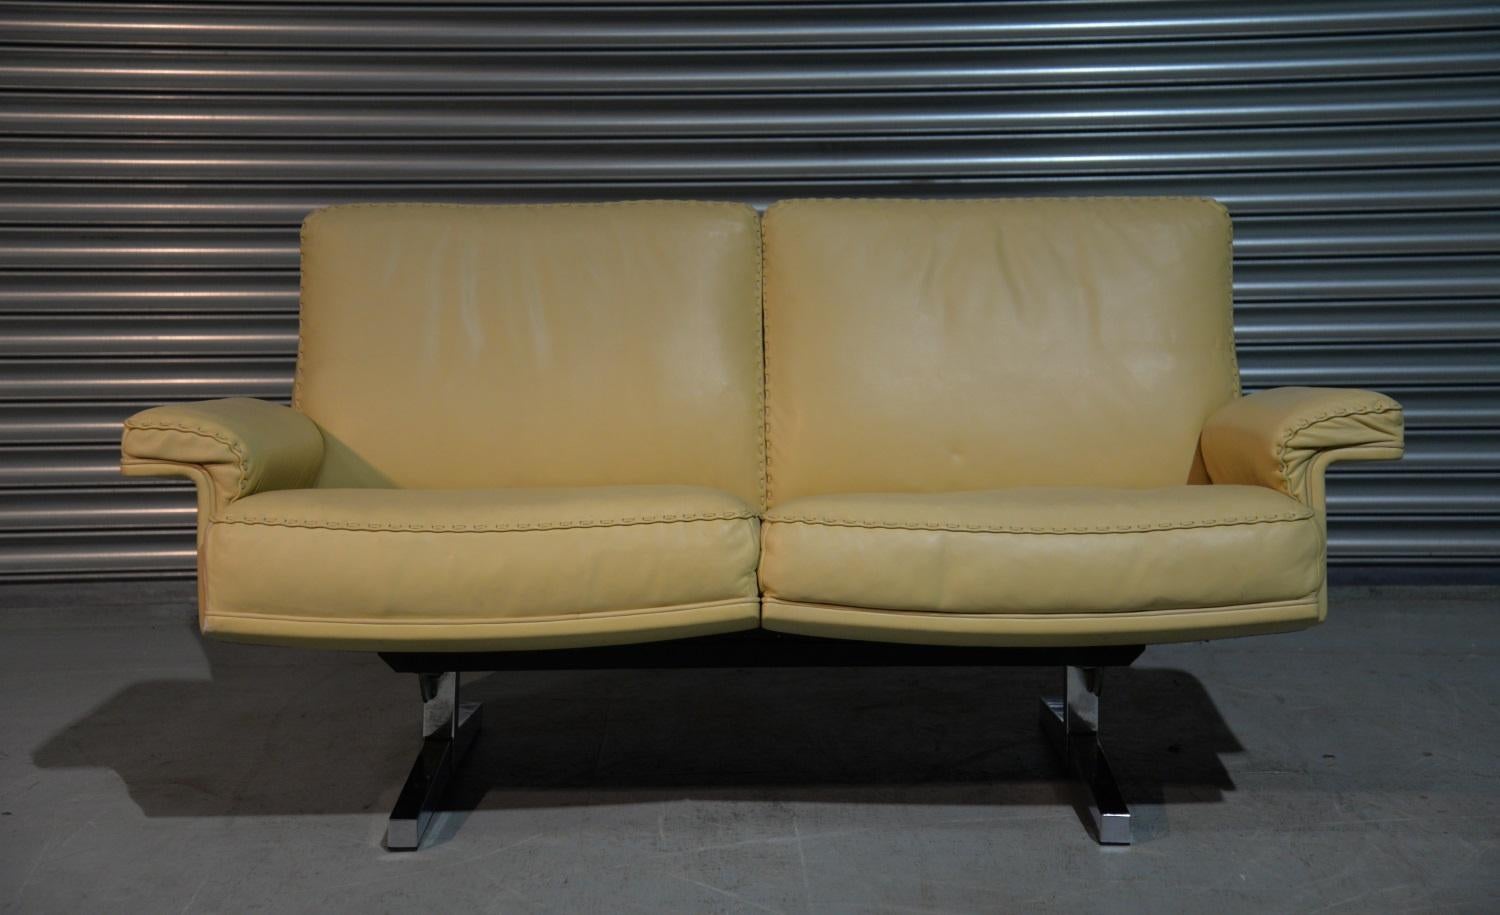 Vintage De Sede DS 35 Two-Seat Sofa or Loveseat, Swizerland 1970s For Sale 2